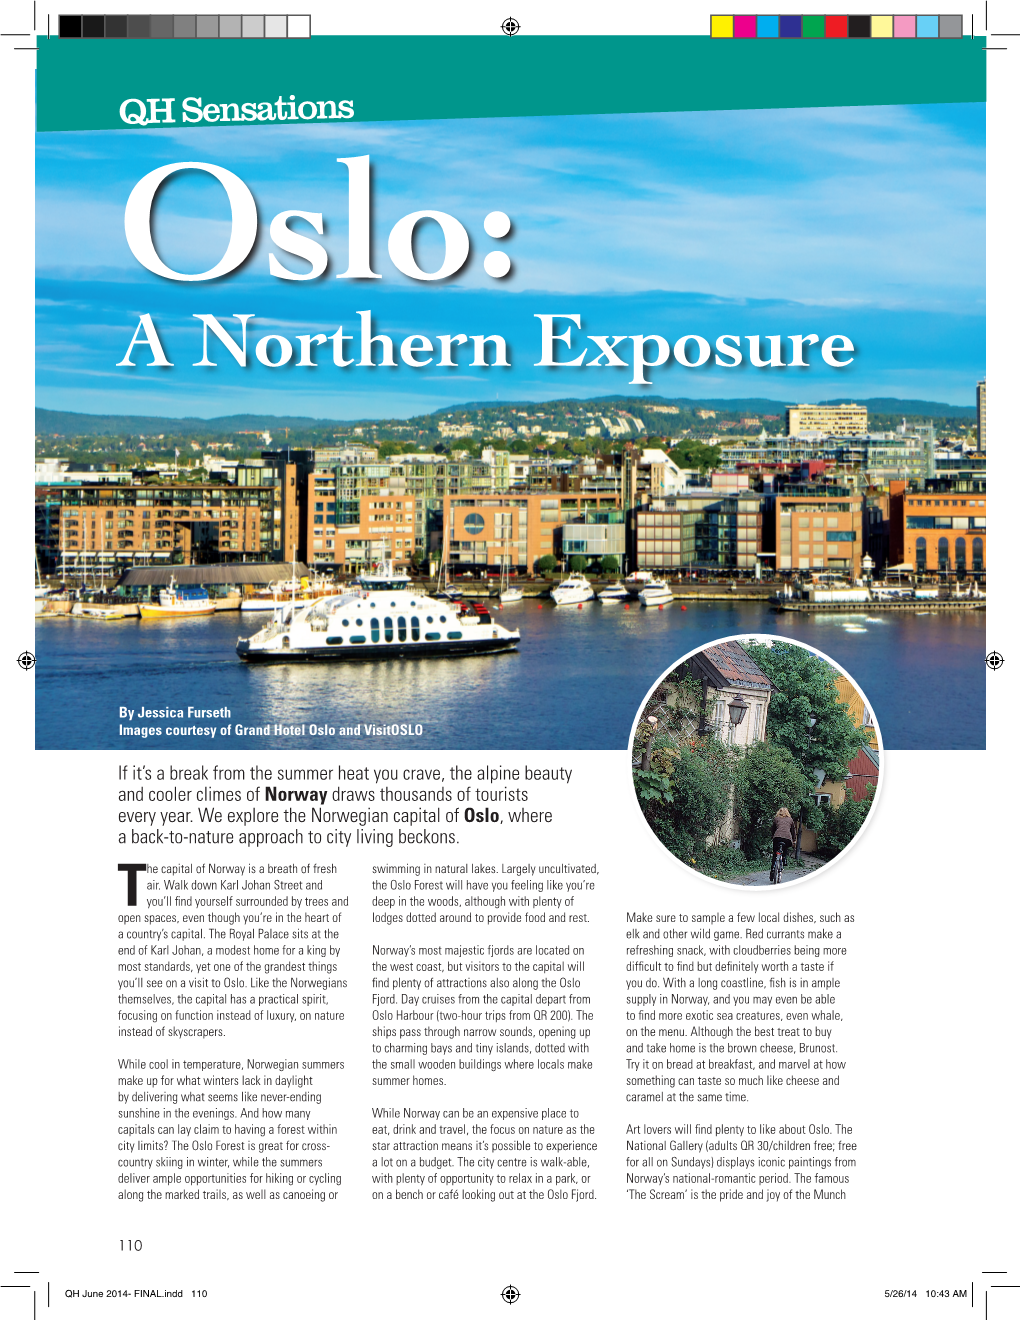 Oslo: a Northern Exposure